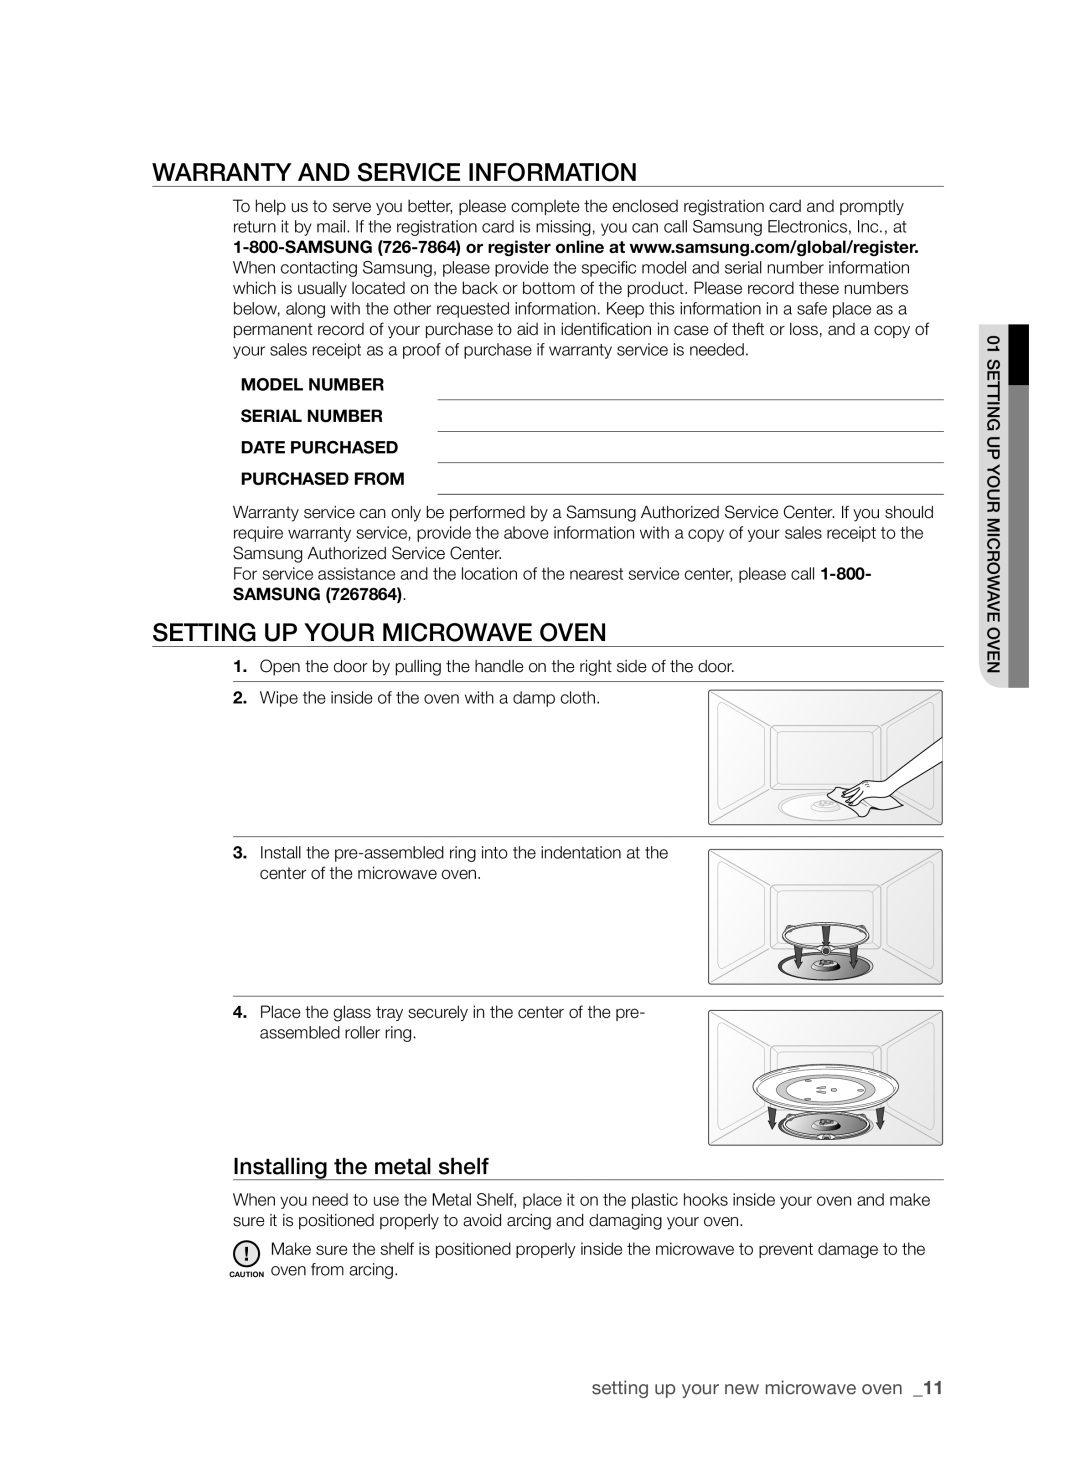 Samsung SMH7185 user manual Warranty and service information, Setting up your microwave oven, Installing the metal shelf 